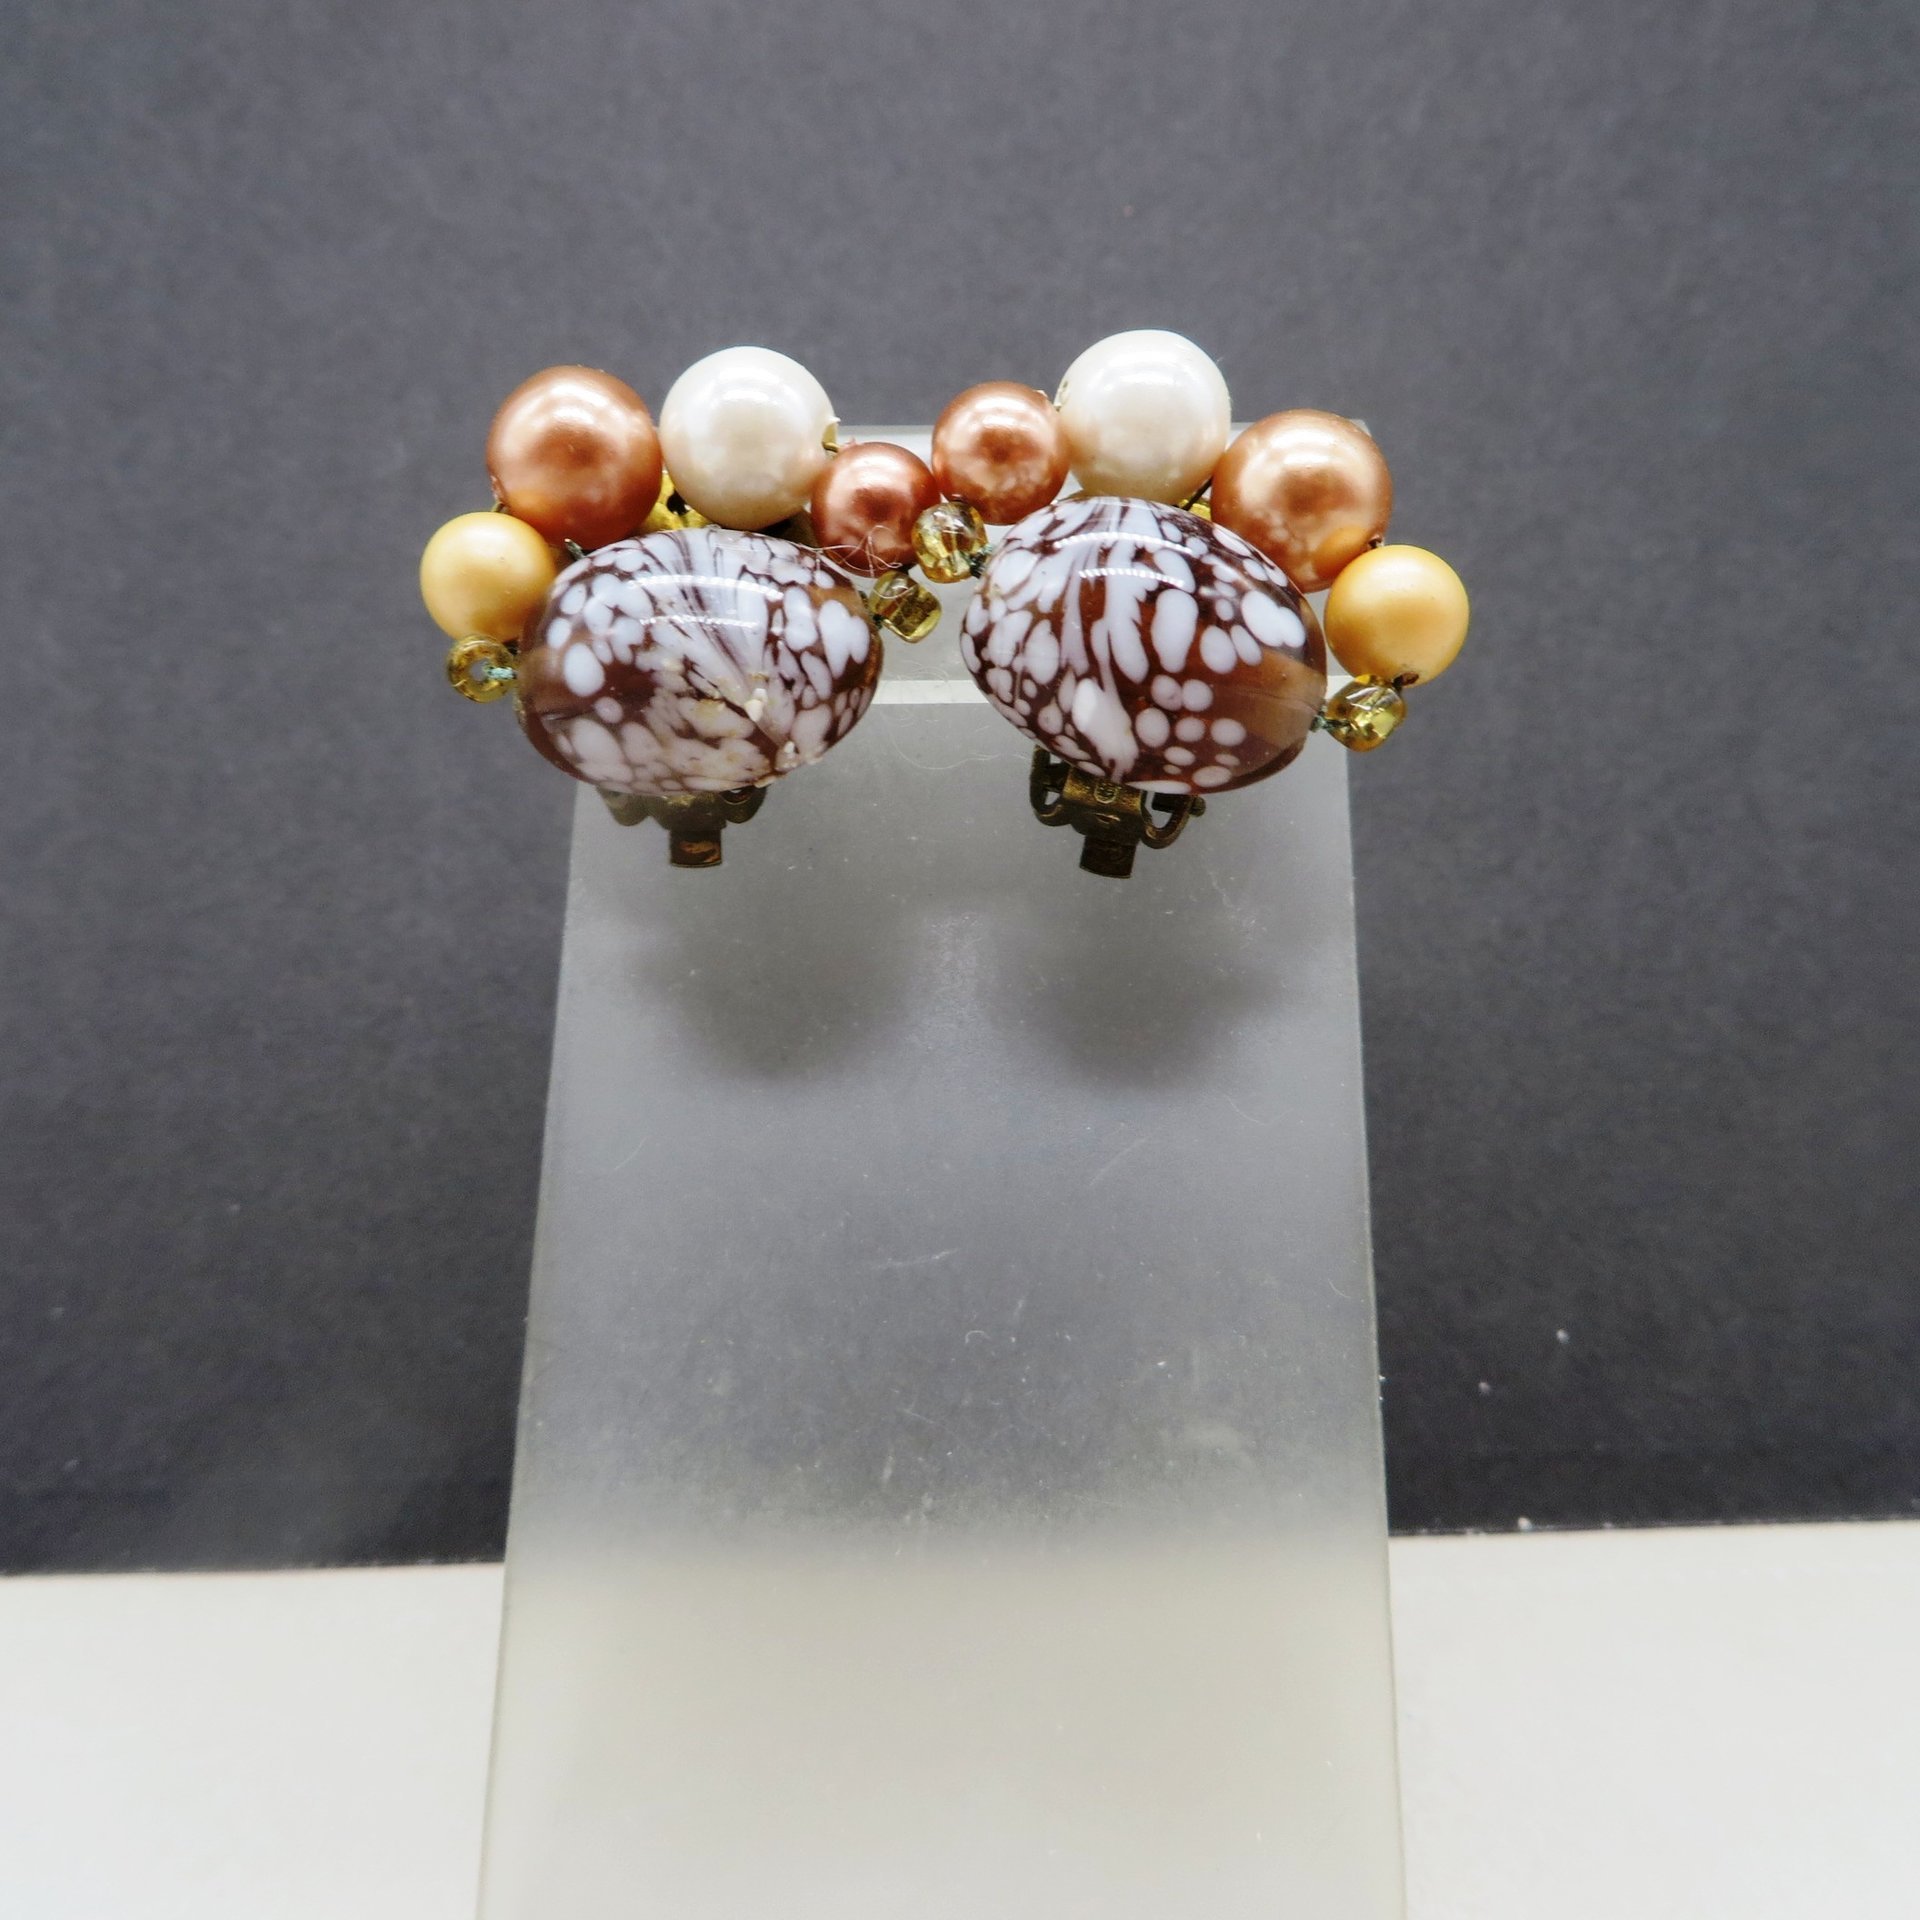 1960's Multi-Color Beaded Earrings  in Mottled Wine, Copper, Yellow and White, Vintage Japan Jewelry